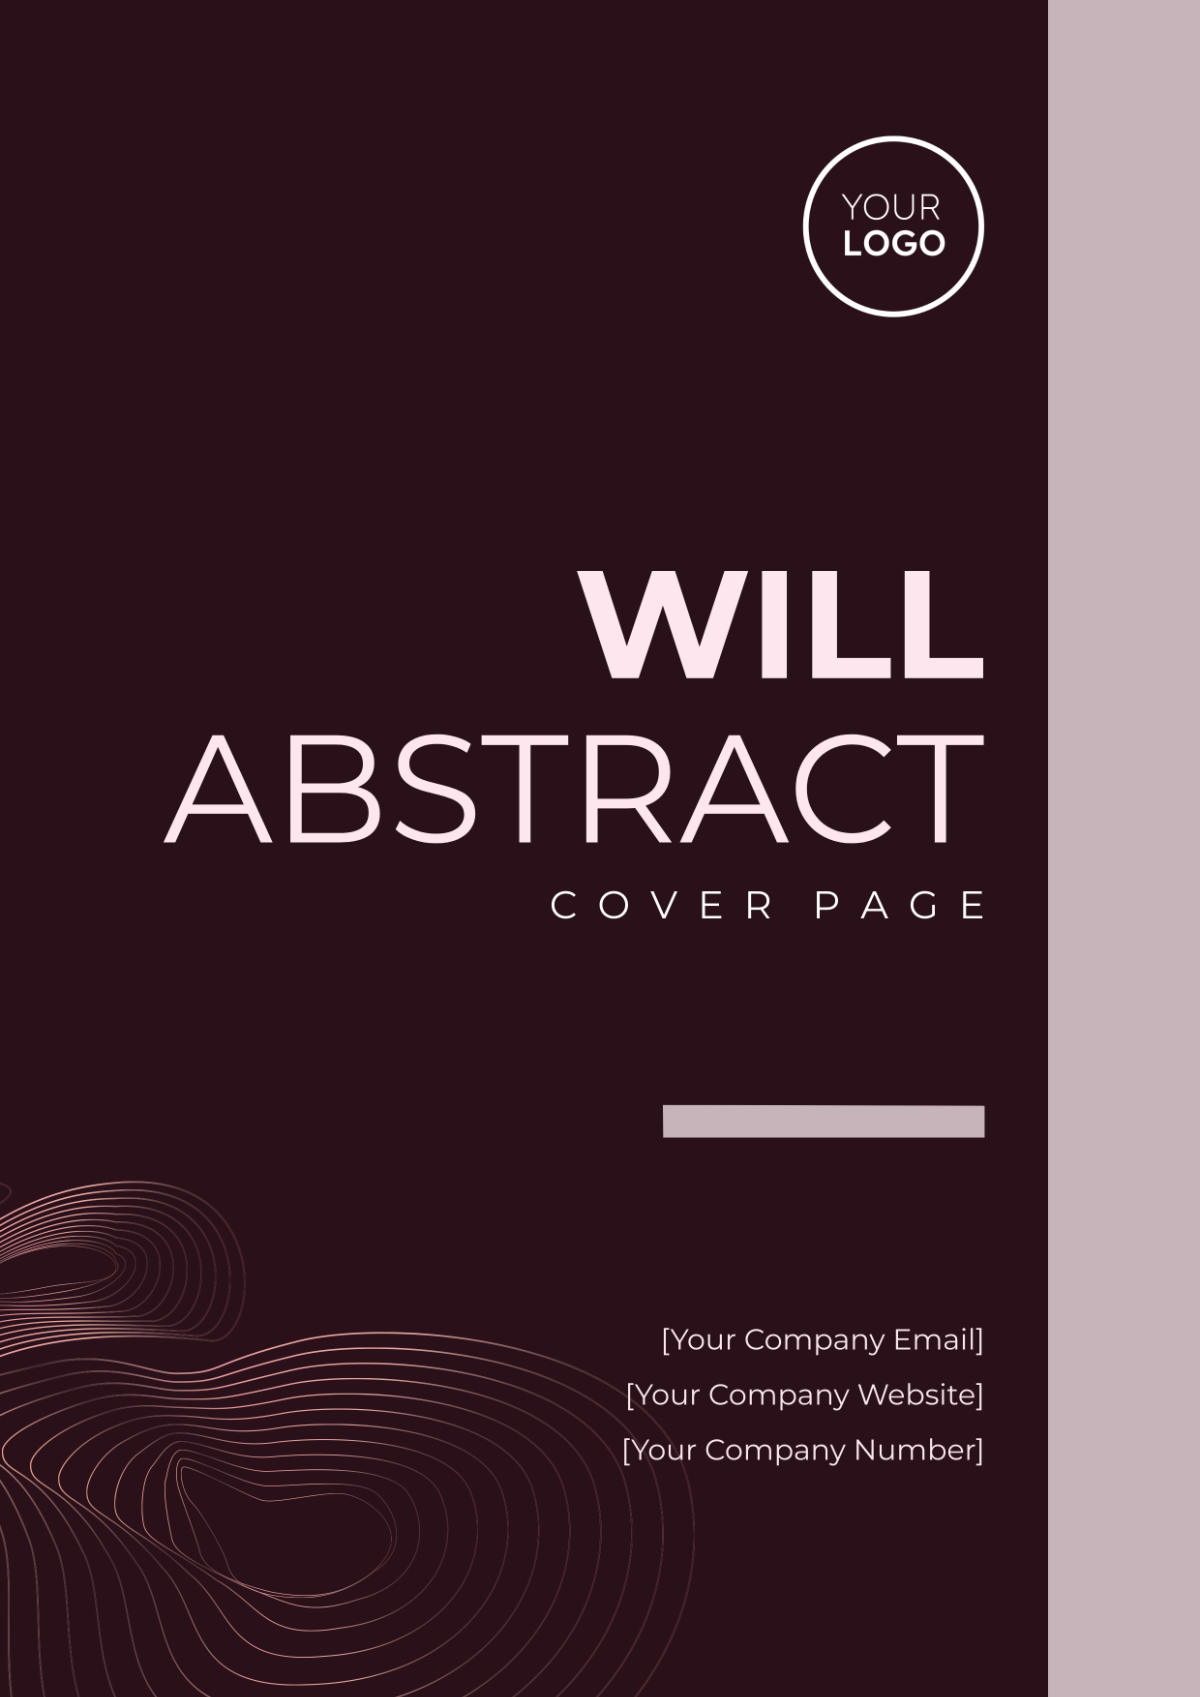 Will Abstract Cover Page